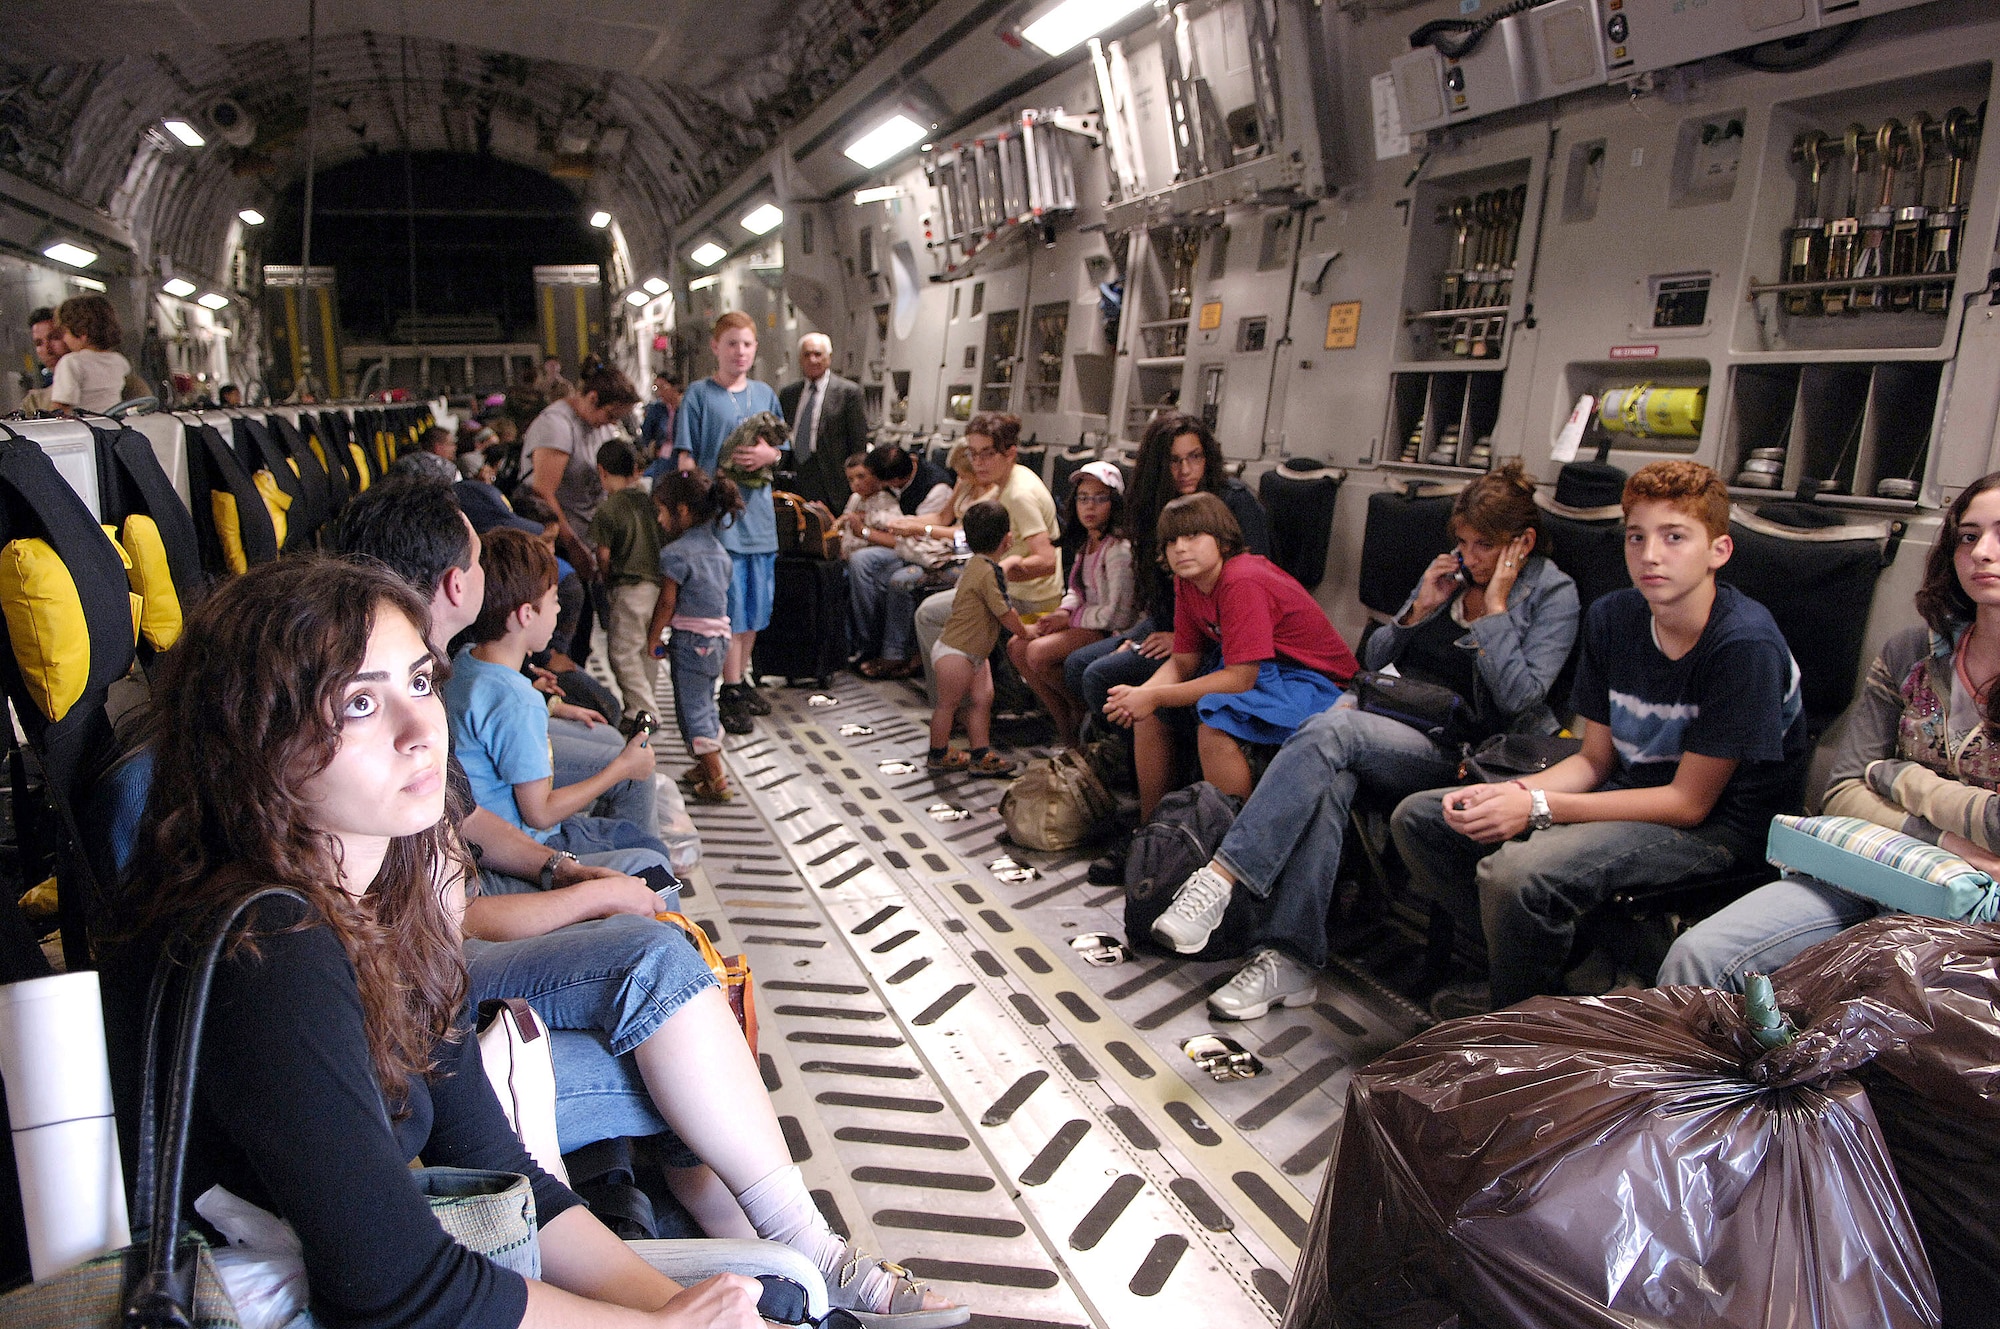 Ninety-five American citizens from Lebanon wait to disembark a C-17 Globemaster III July 24 at McGuire Air Force Base, N.J. Phoenix Ravens along with the Federal Air Marshals ensured the safety of the evacuees and the crew during these missions. The Federal Air Marshal Service awarded the Air Mobility Command 26 Ravens who provided transportation security for the Lebanon evacuees. (U.S. Air Force photo/Denise Gould)